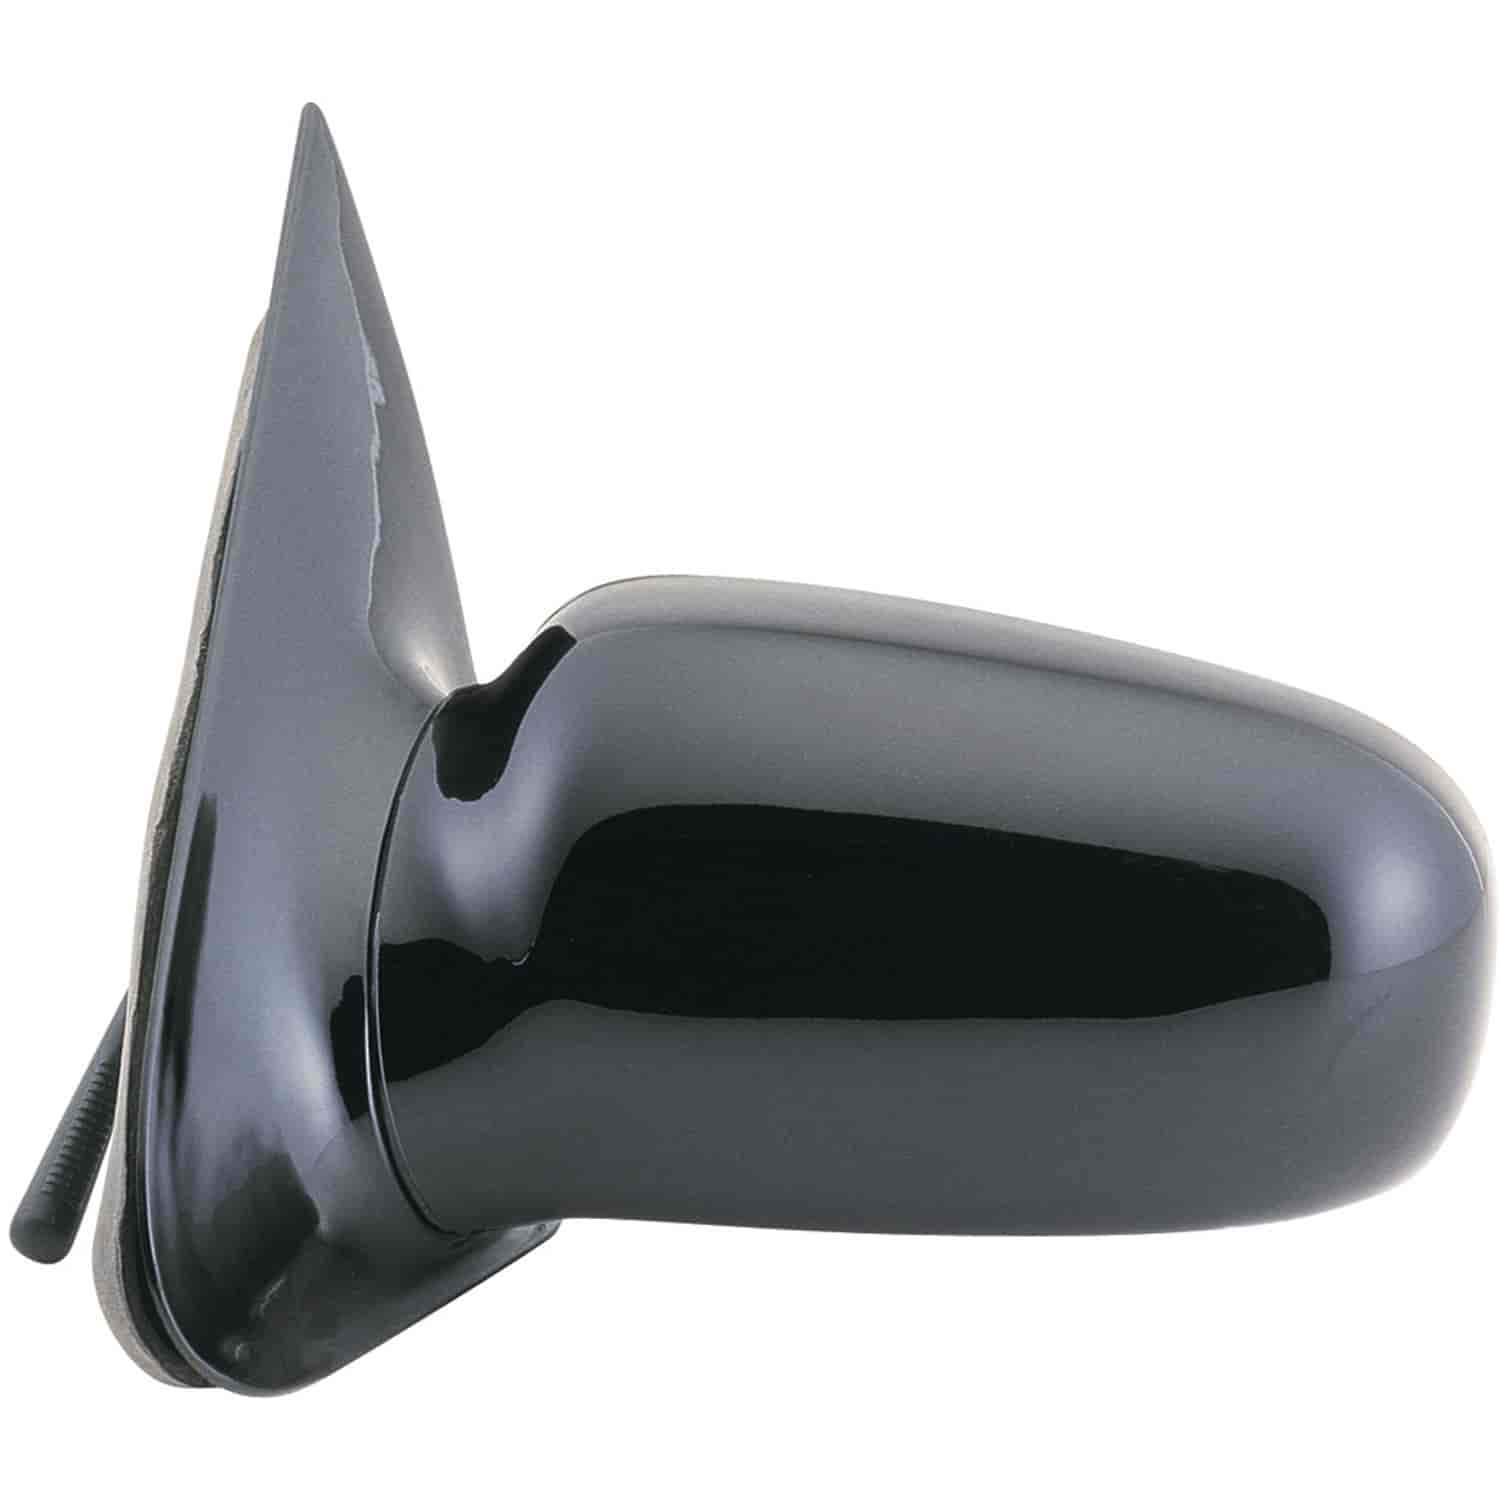 OEM Style Replacement mirror for 95-05 Chevy Cavalier